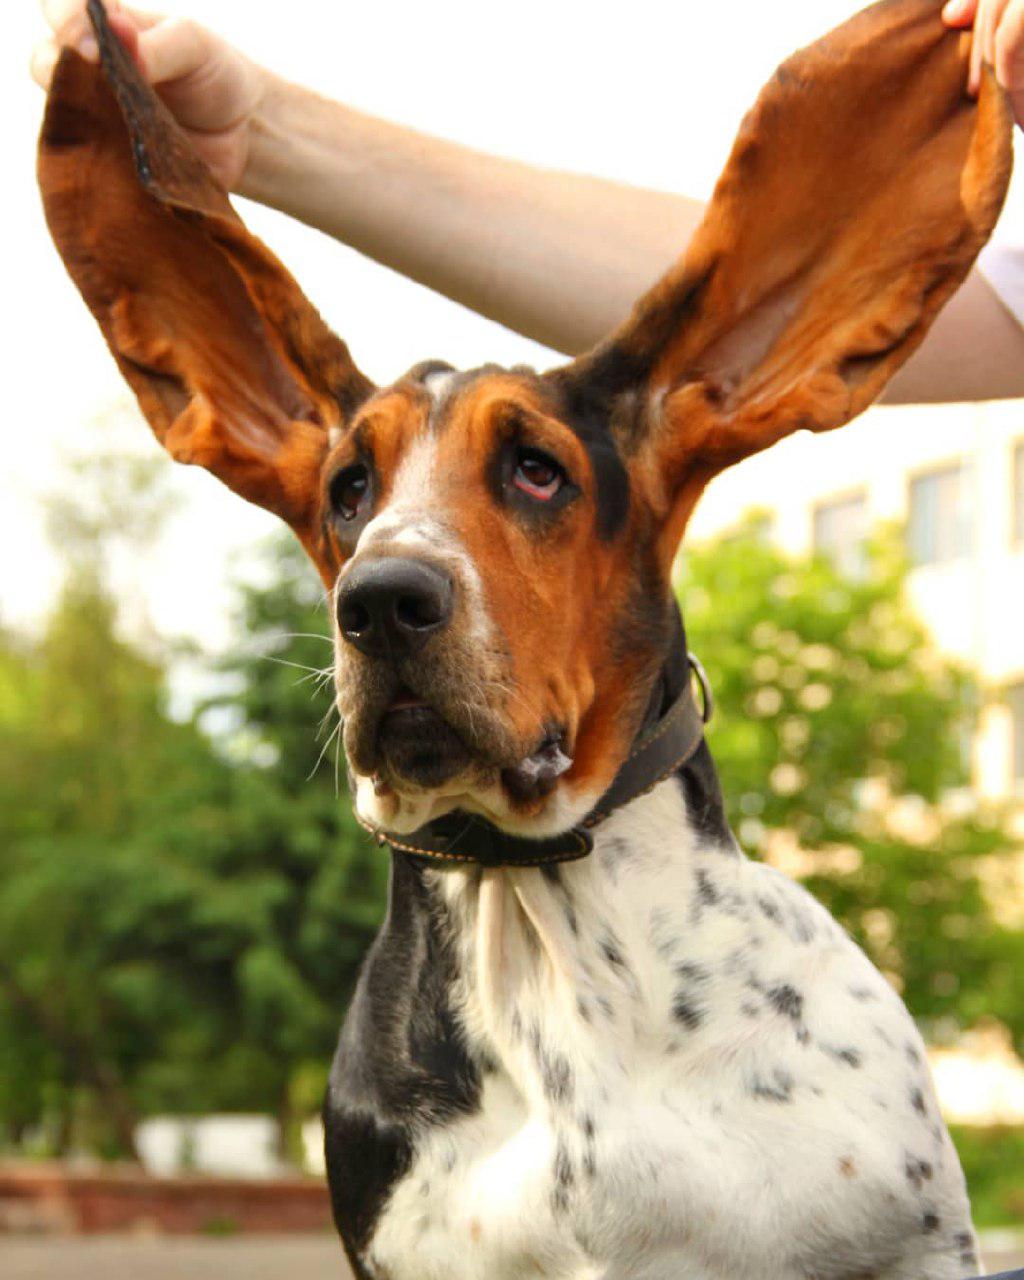 A Basset Hound at the park with its ears spread out